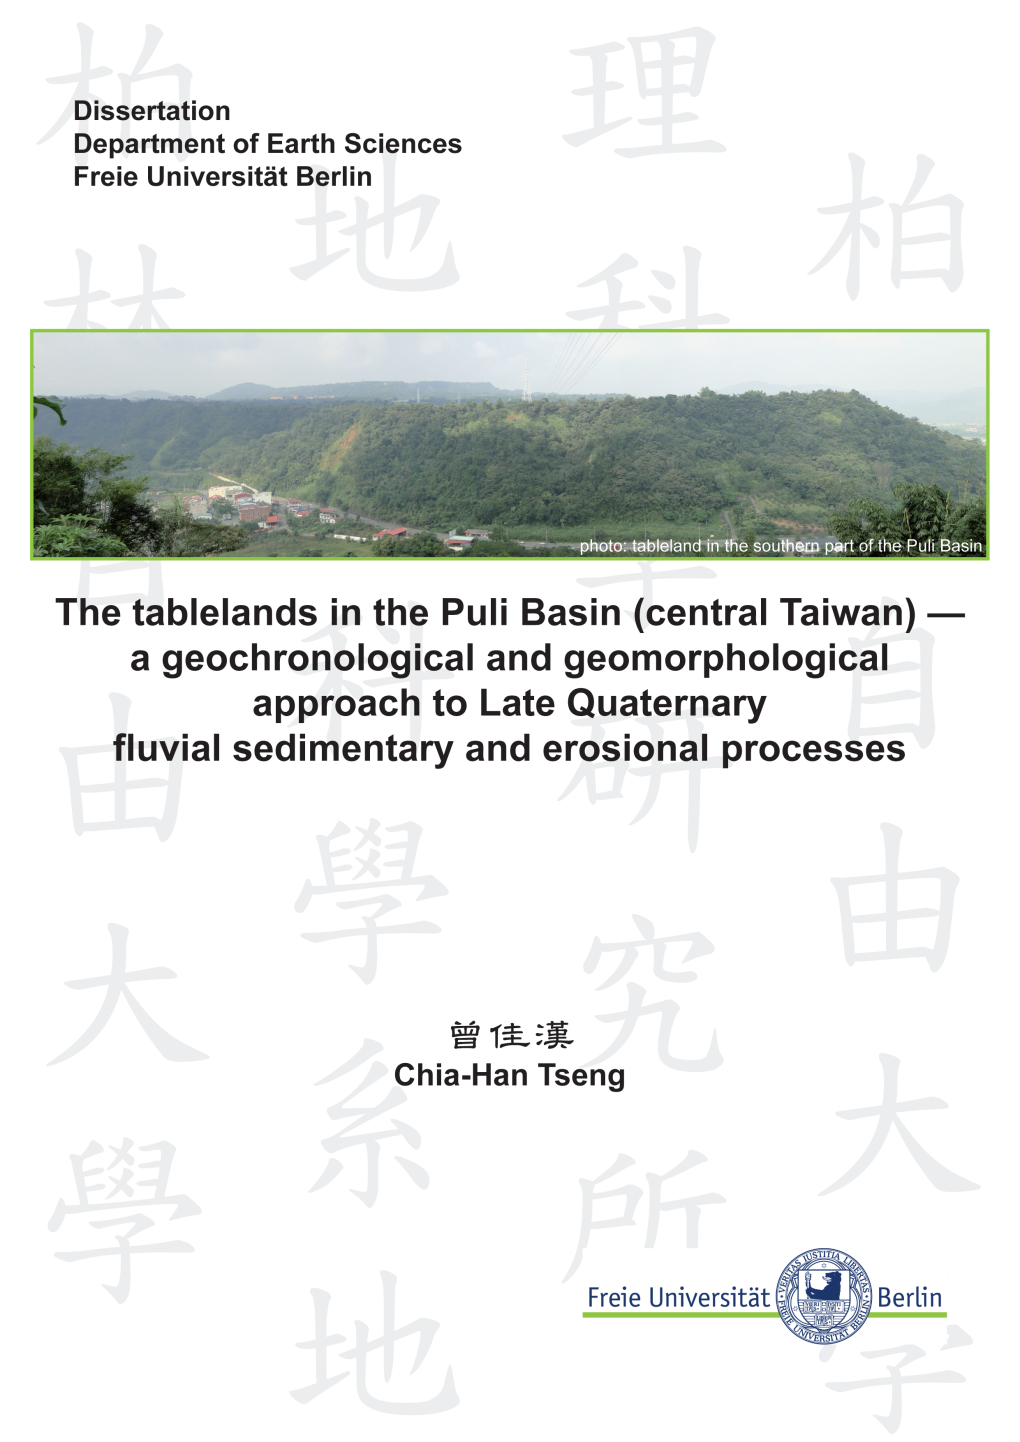 The Tablelands in the Puli Basin (Central Taiwan)—A